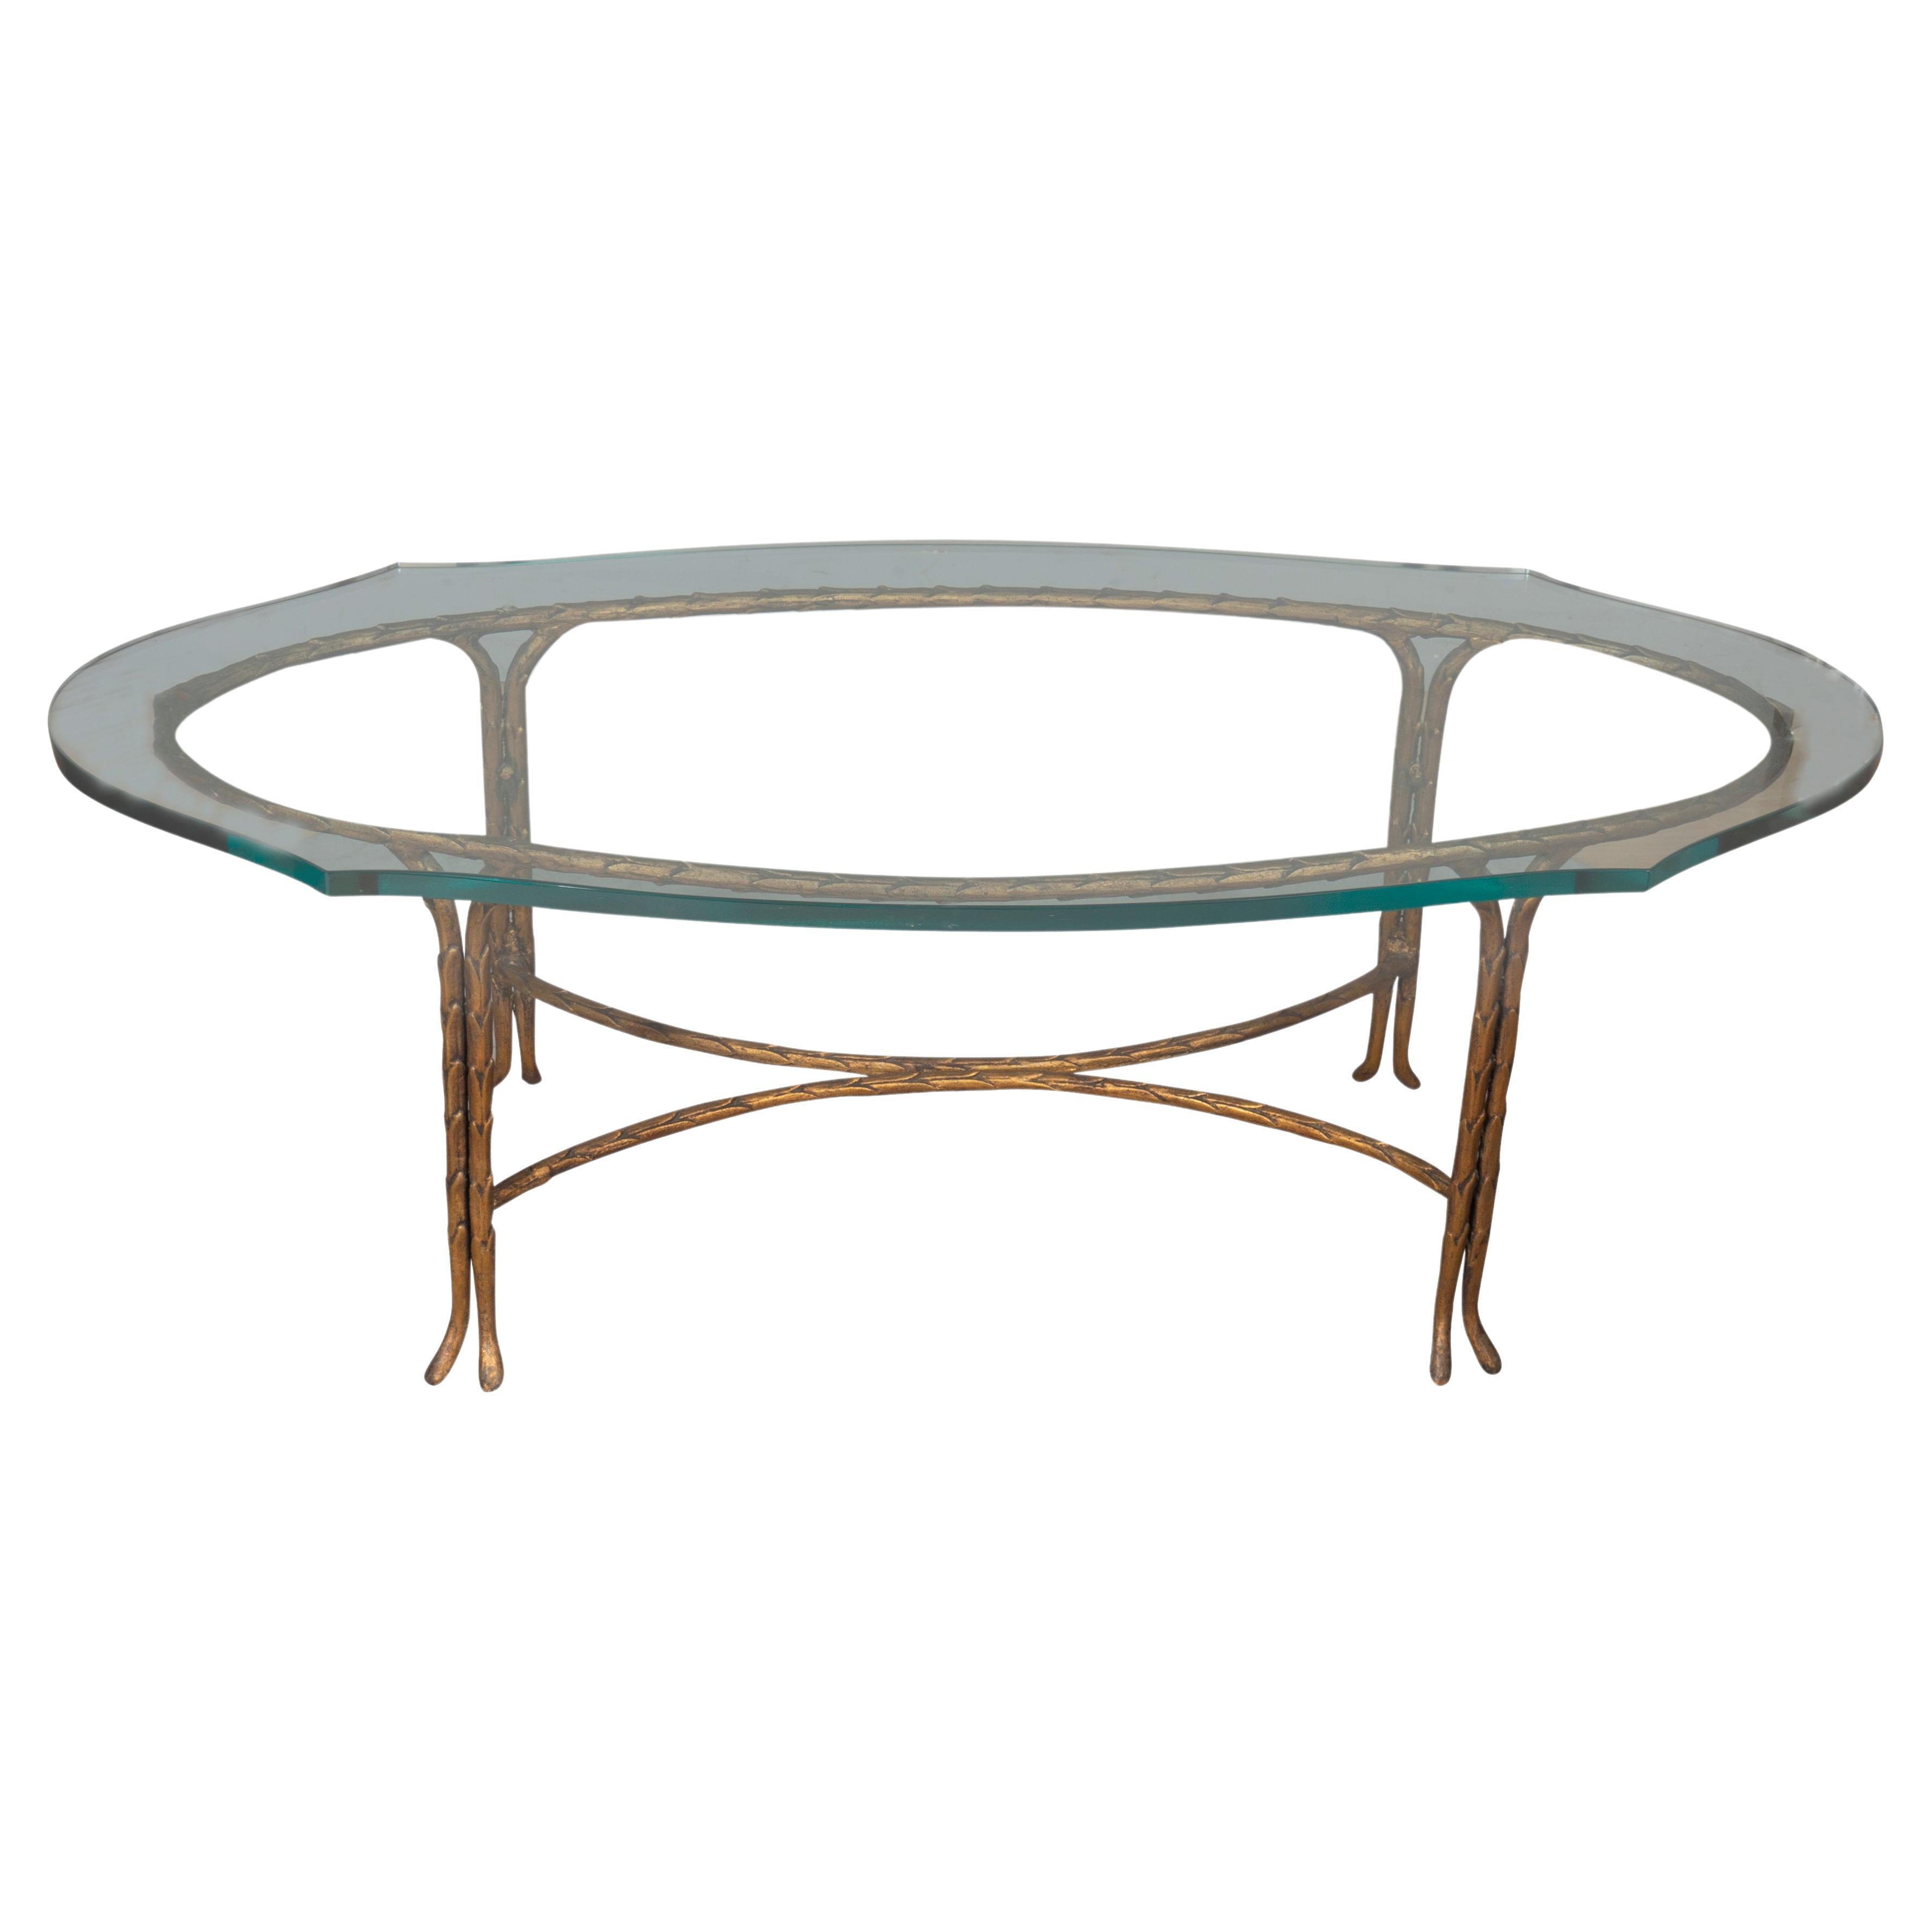 Maison Bagues Bronze and Glass Coffee Table